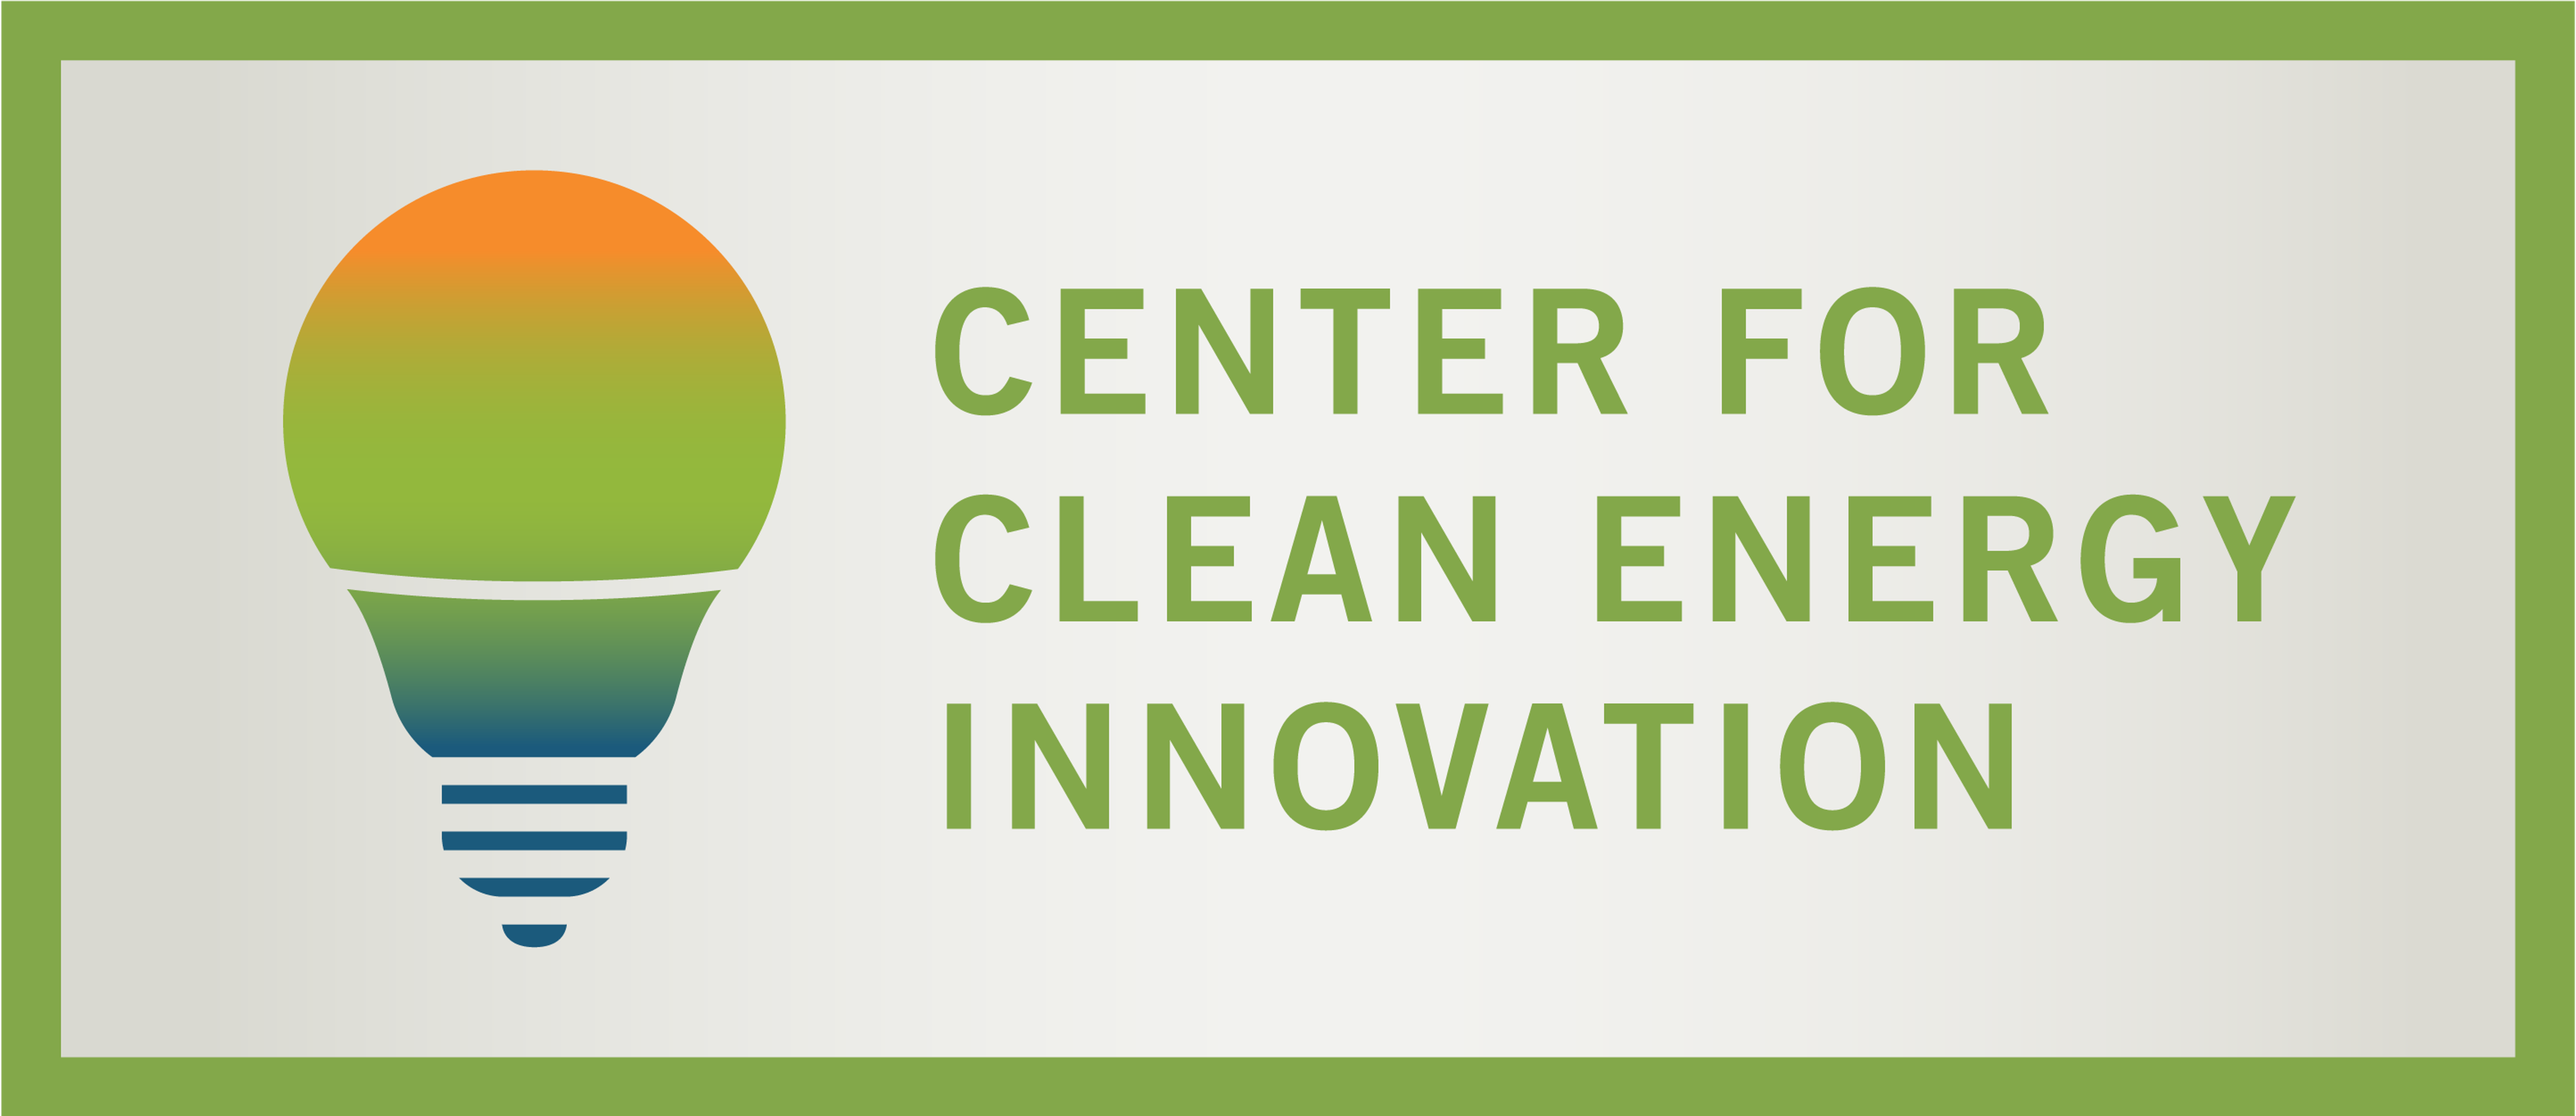 Comments on U.S. DOE’s Call for the Establishment of a New Clean Energy Manufacturing Institute